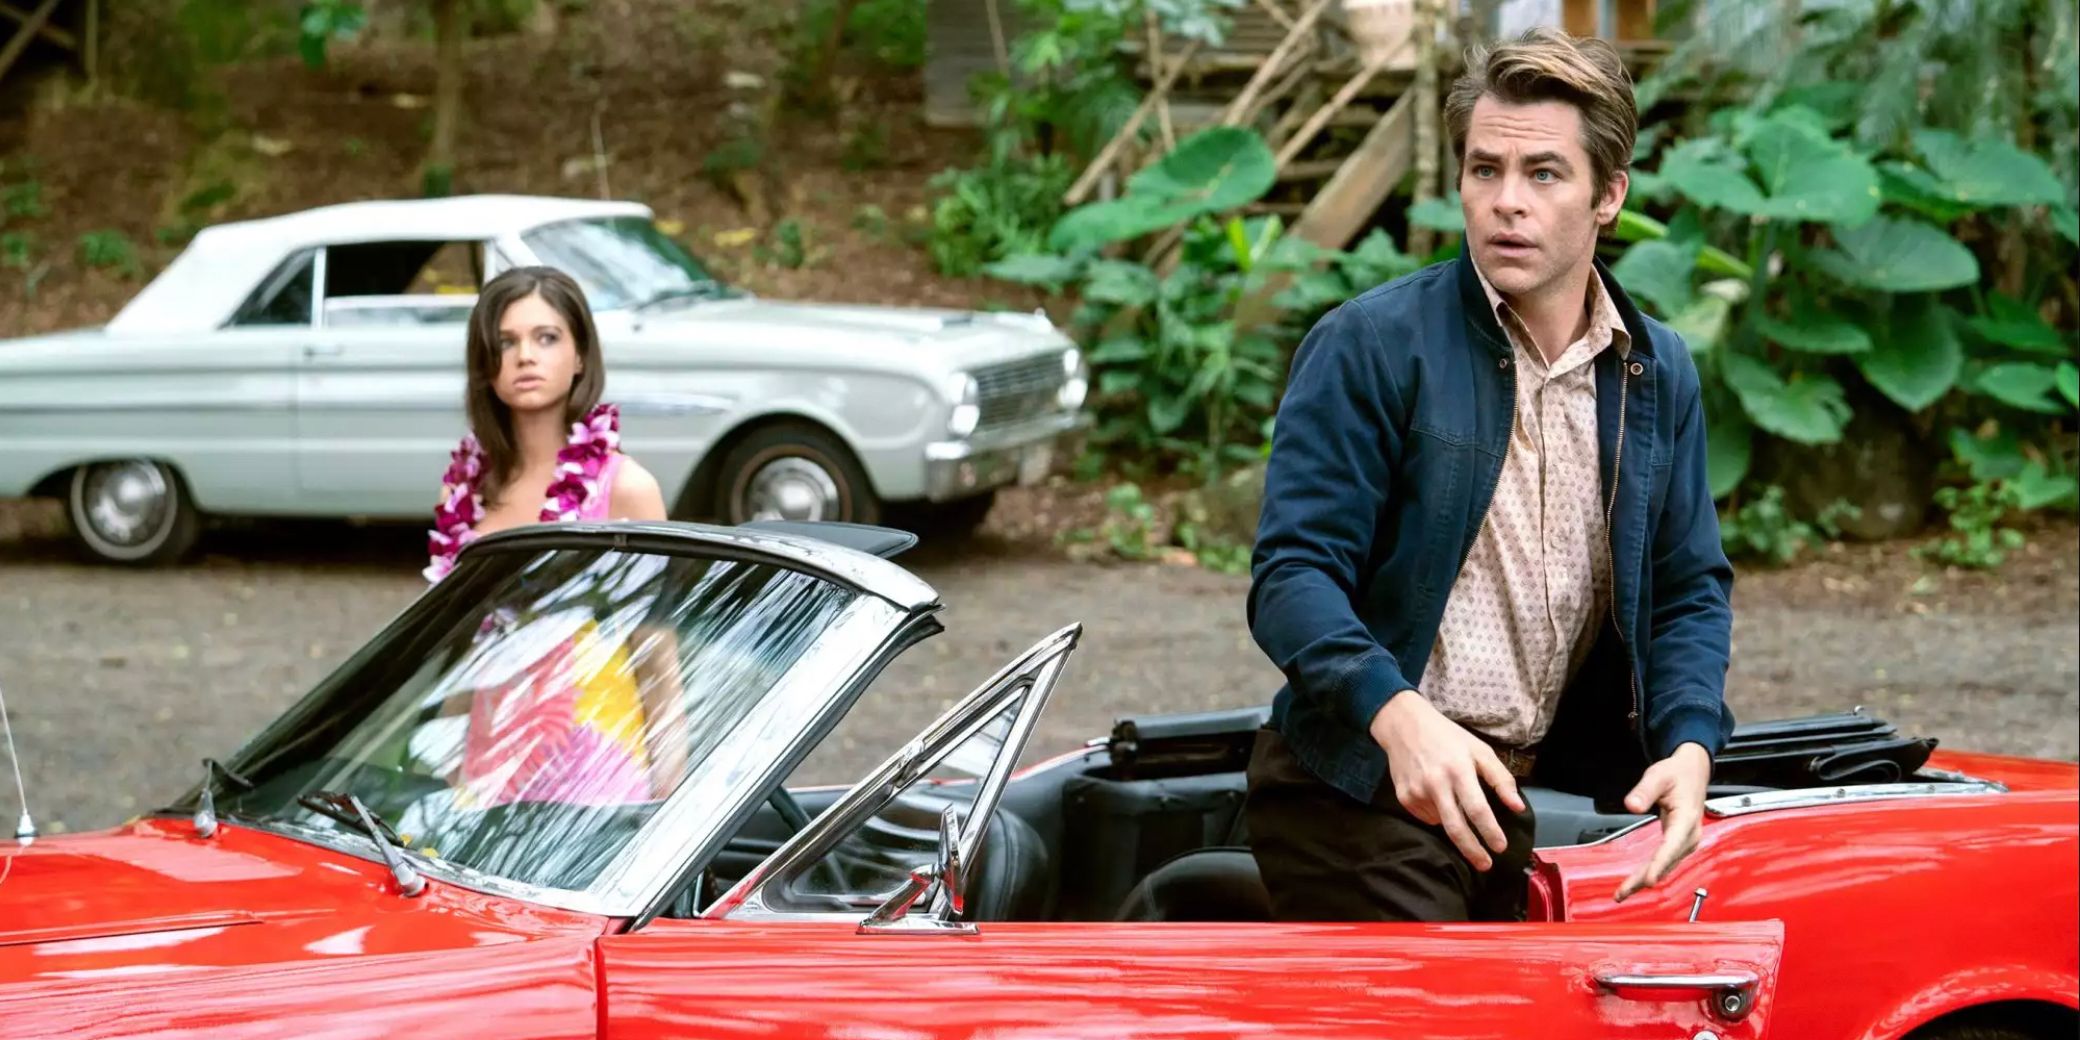 India Eisley and Chris Pine get out of a car in I Am The Night